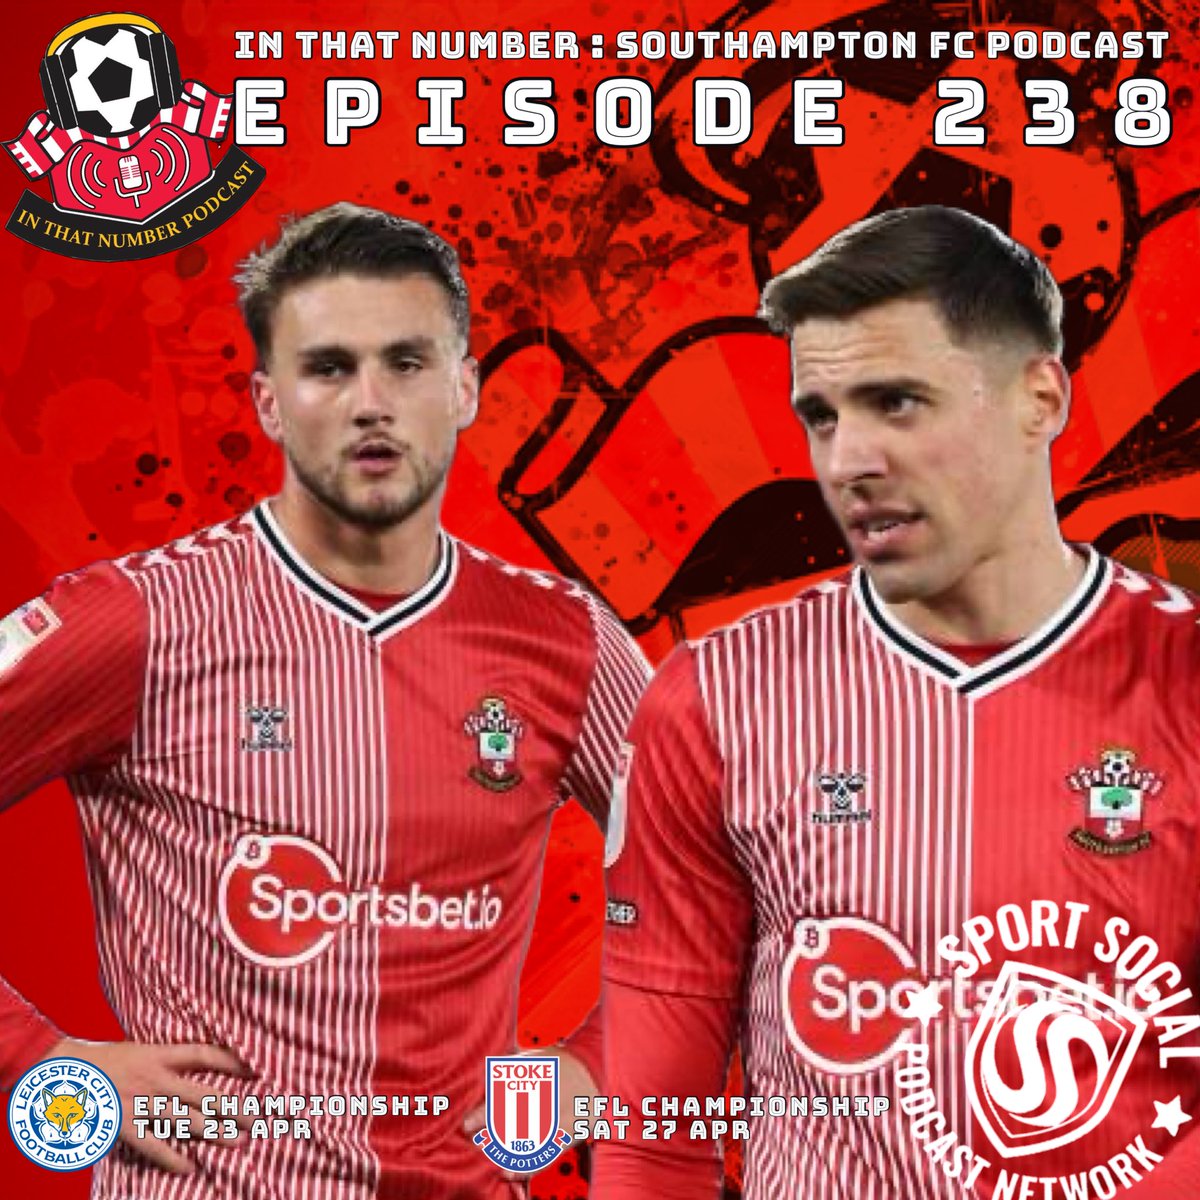 #InThatNumber 2️⃣3️⃣8️⃣

@RayHunt84 & @moscowmush have another bad week to discuss 

🗞️ ITN News 
🏴󠁧󠁢󠁳󠁣󠁴󠁿 Ross Stewart return?
🏆 Playoff picture 
🦊 Leicester battering 
🔴 Stoke misery
⚪️ Leeds (a)

#SaintsFC  | #southamptonfc | #WeMarchOn |